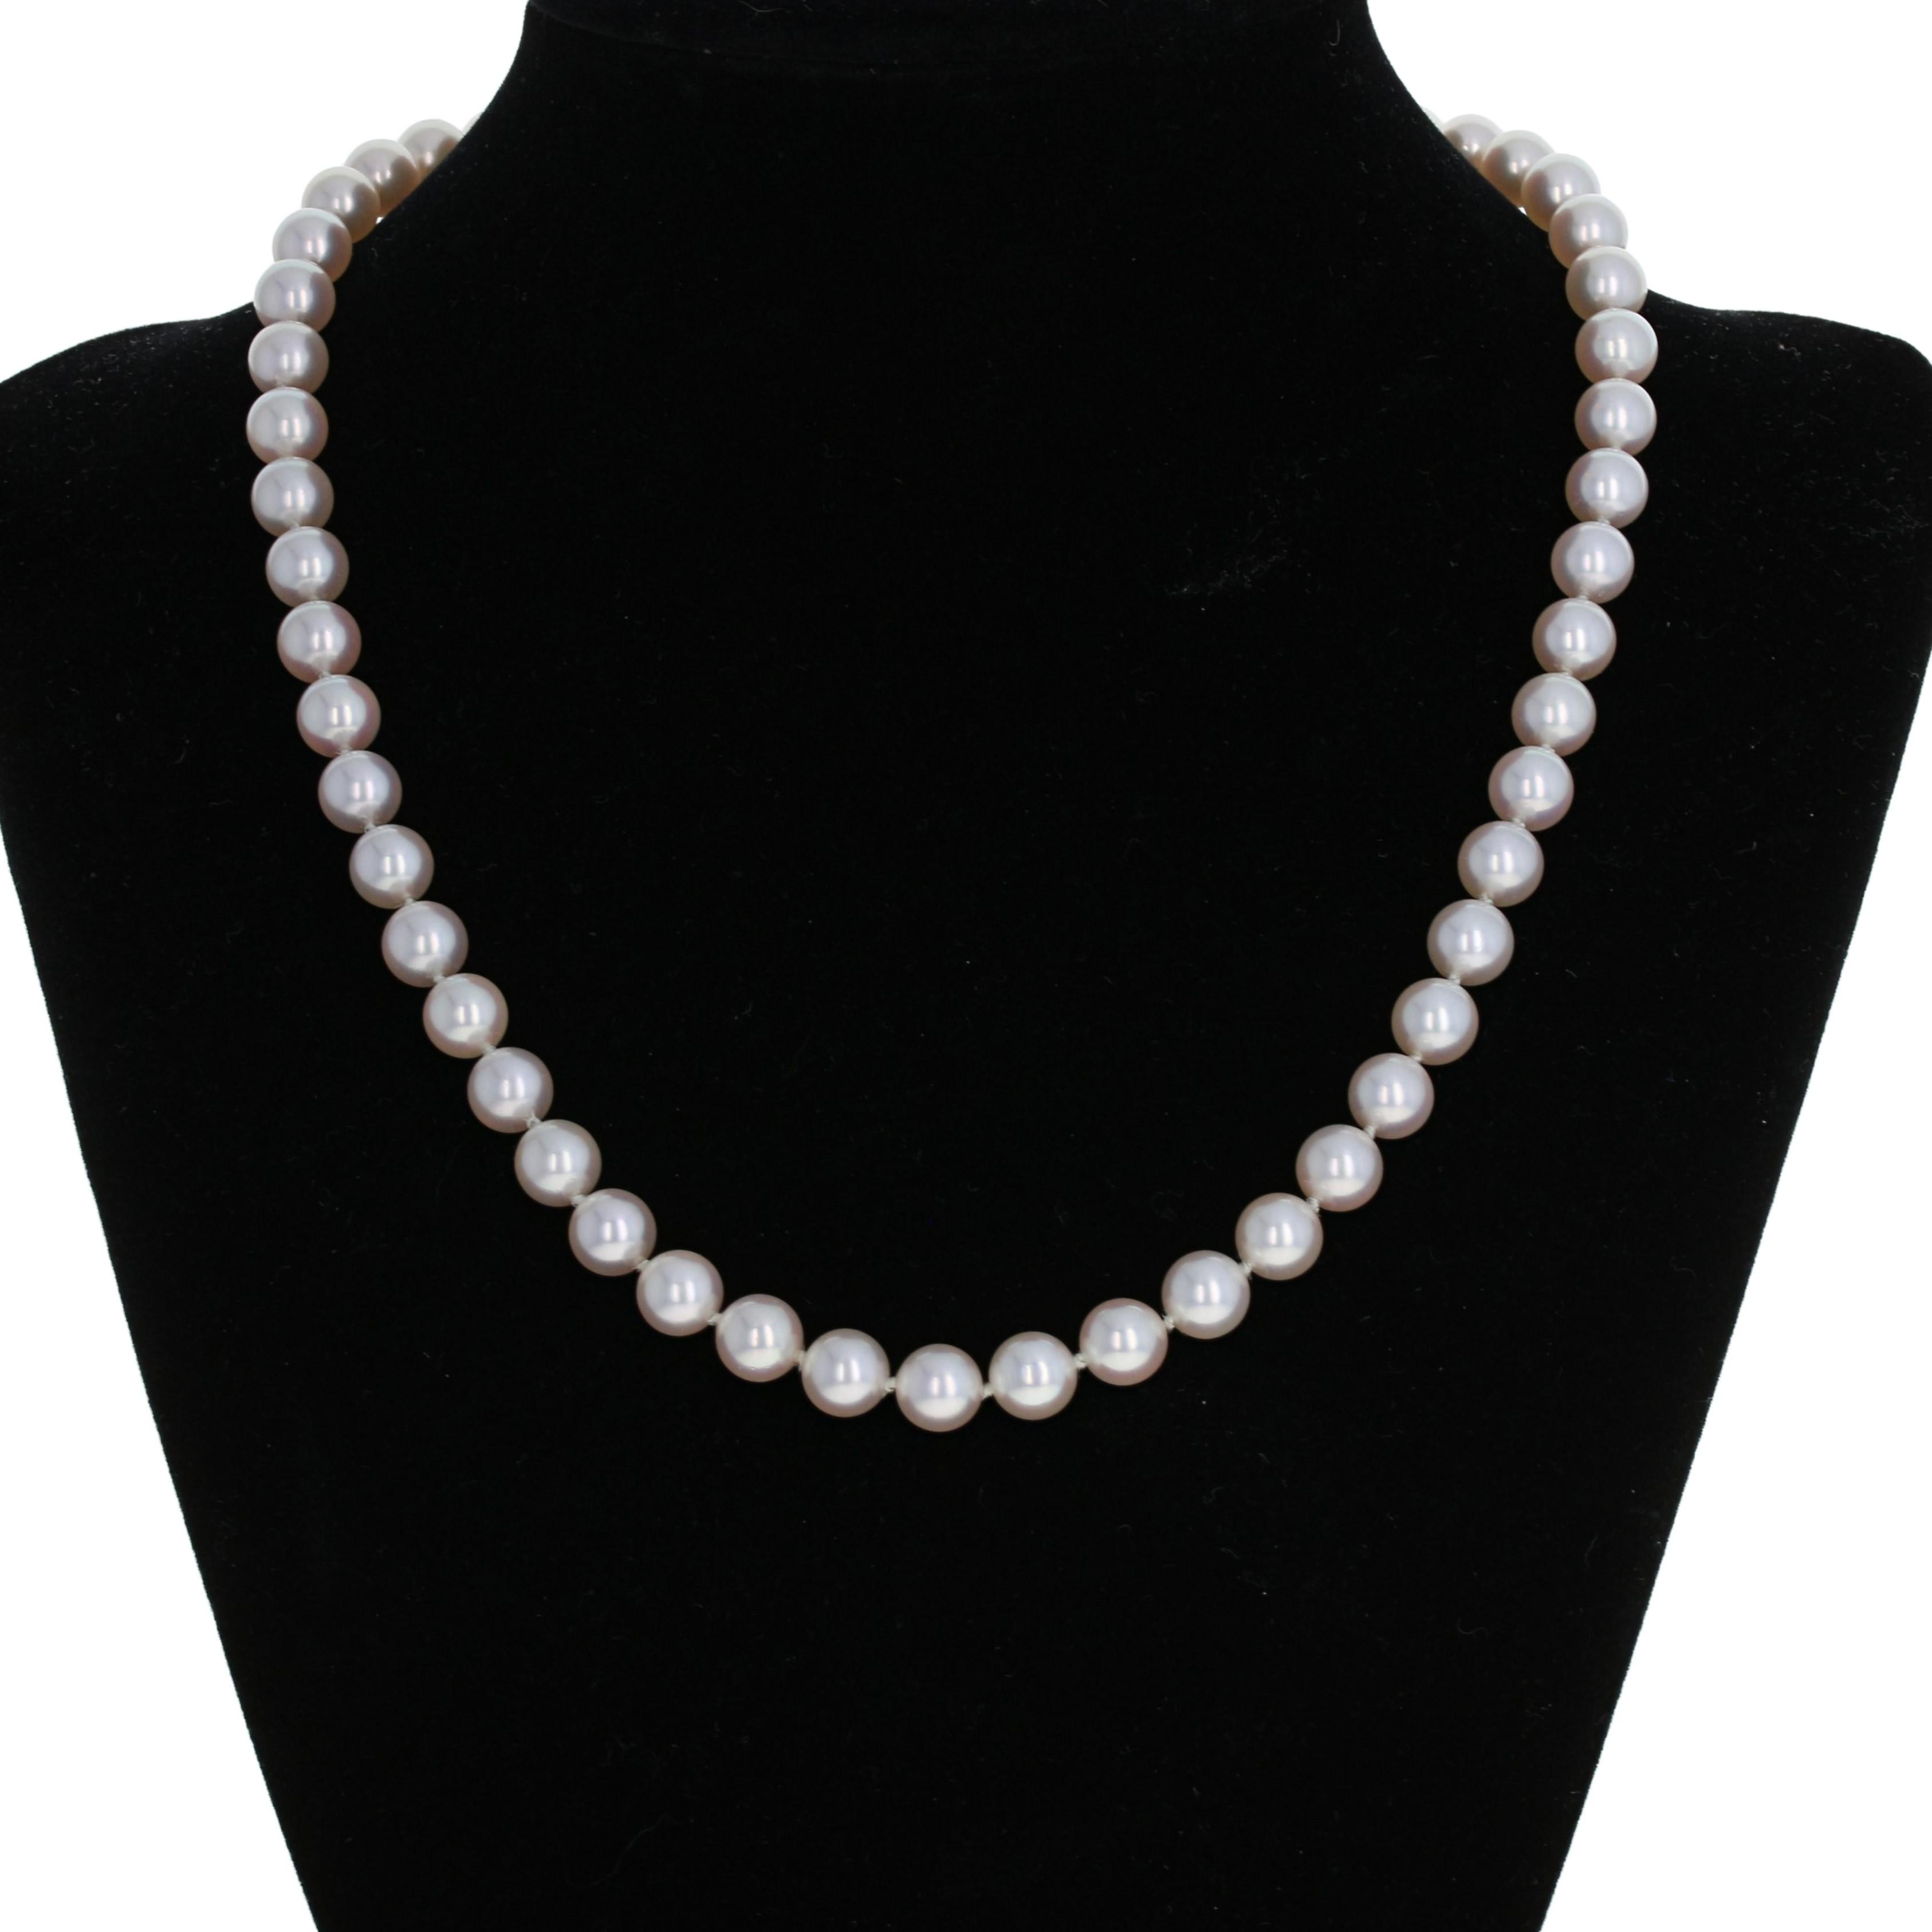 Metal Content: Guaranteed 14k Gold as stamped

Stone Information: 
Akoya Pearls
Diameter: 6.9mm
Accent's Diameter (on clasp): 6.4mm

Style: Knotted Strand
Measurements: length 16 1/2